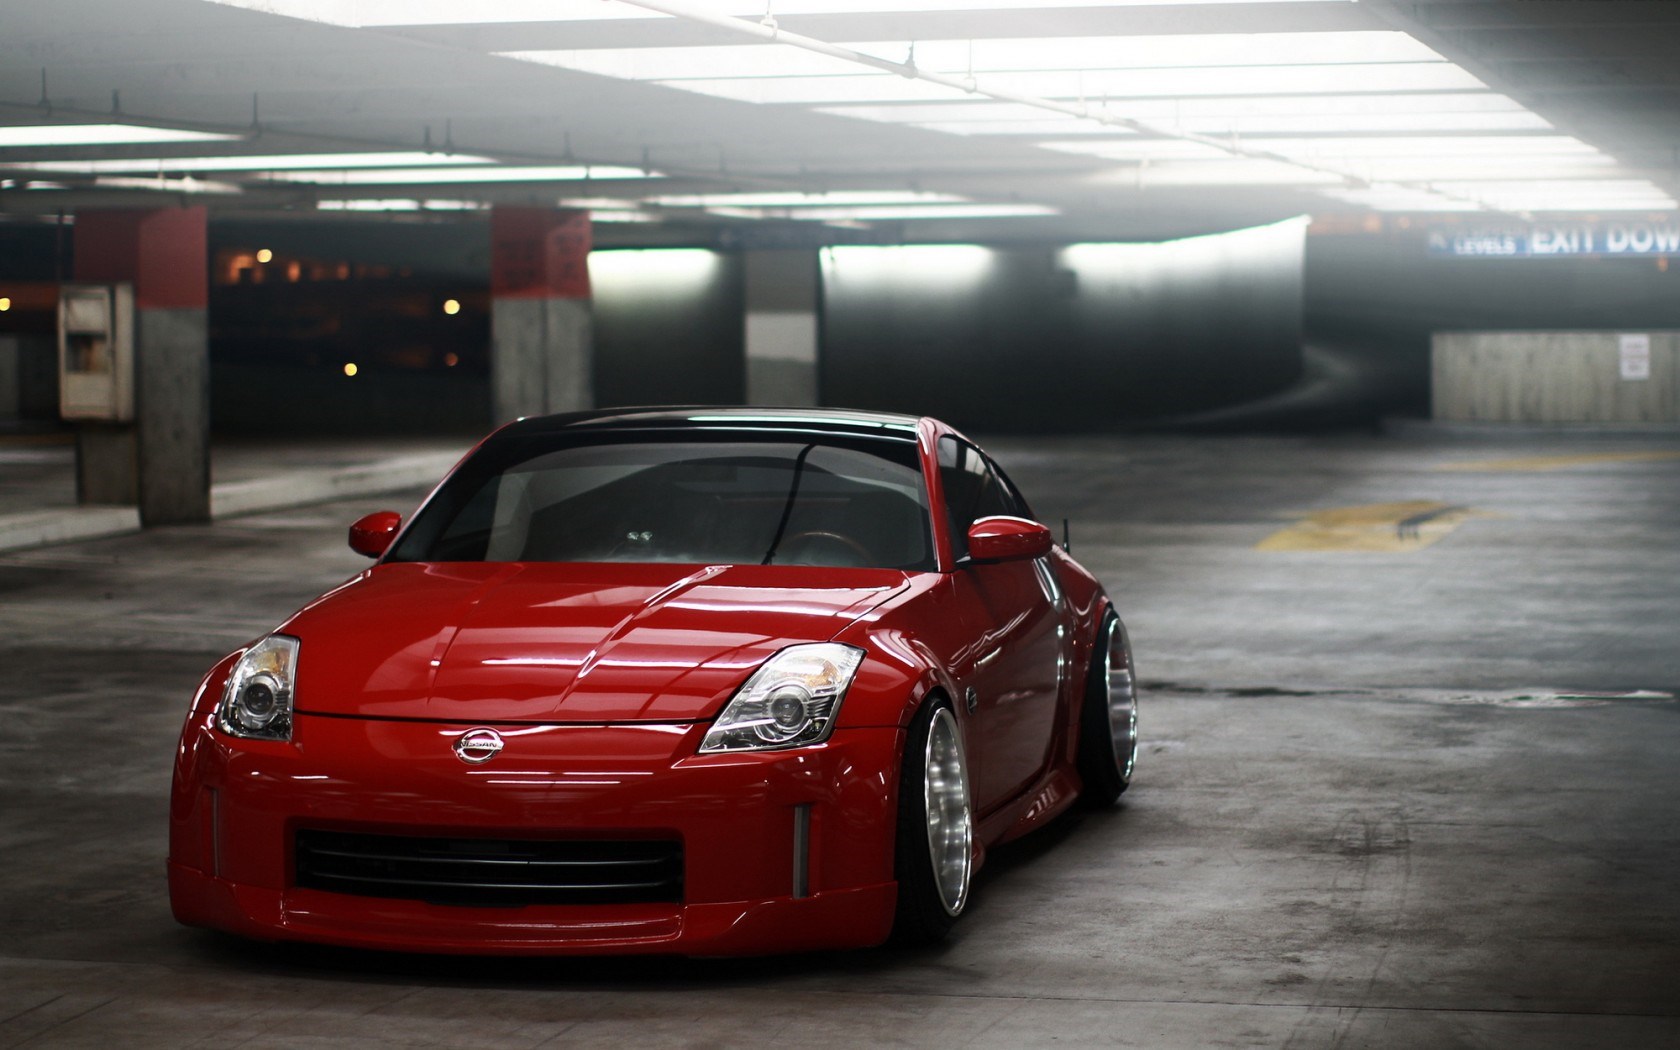 Nissan 350Z Wallpaper and Background Image | 1680x1050